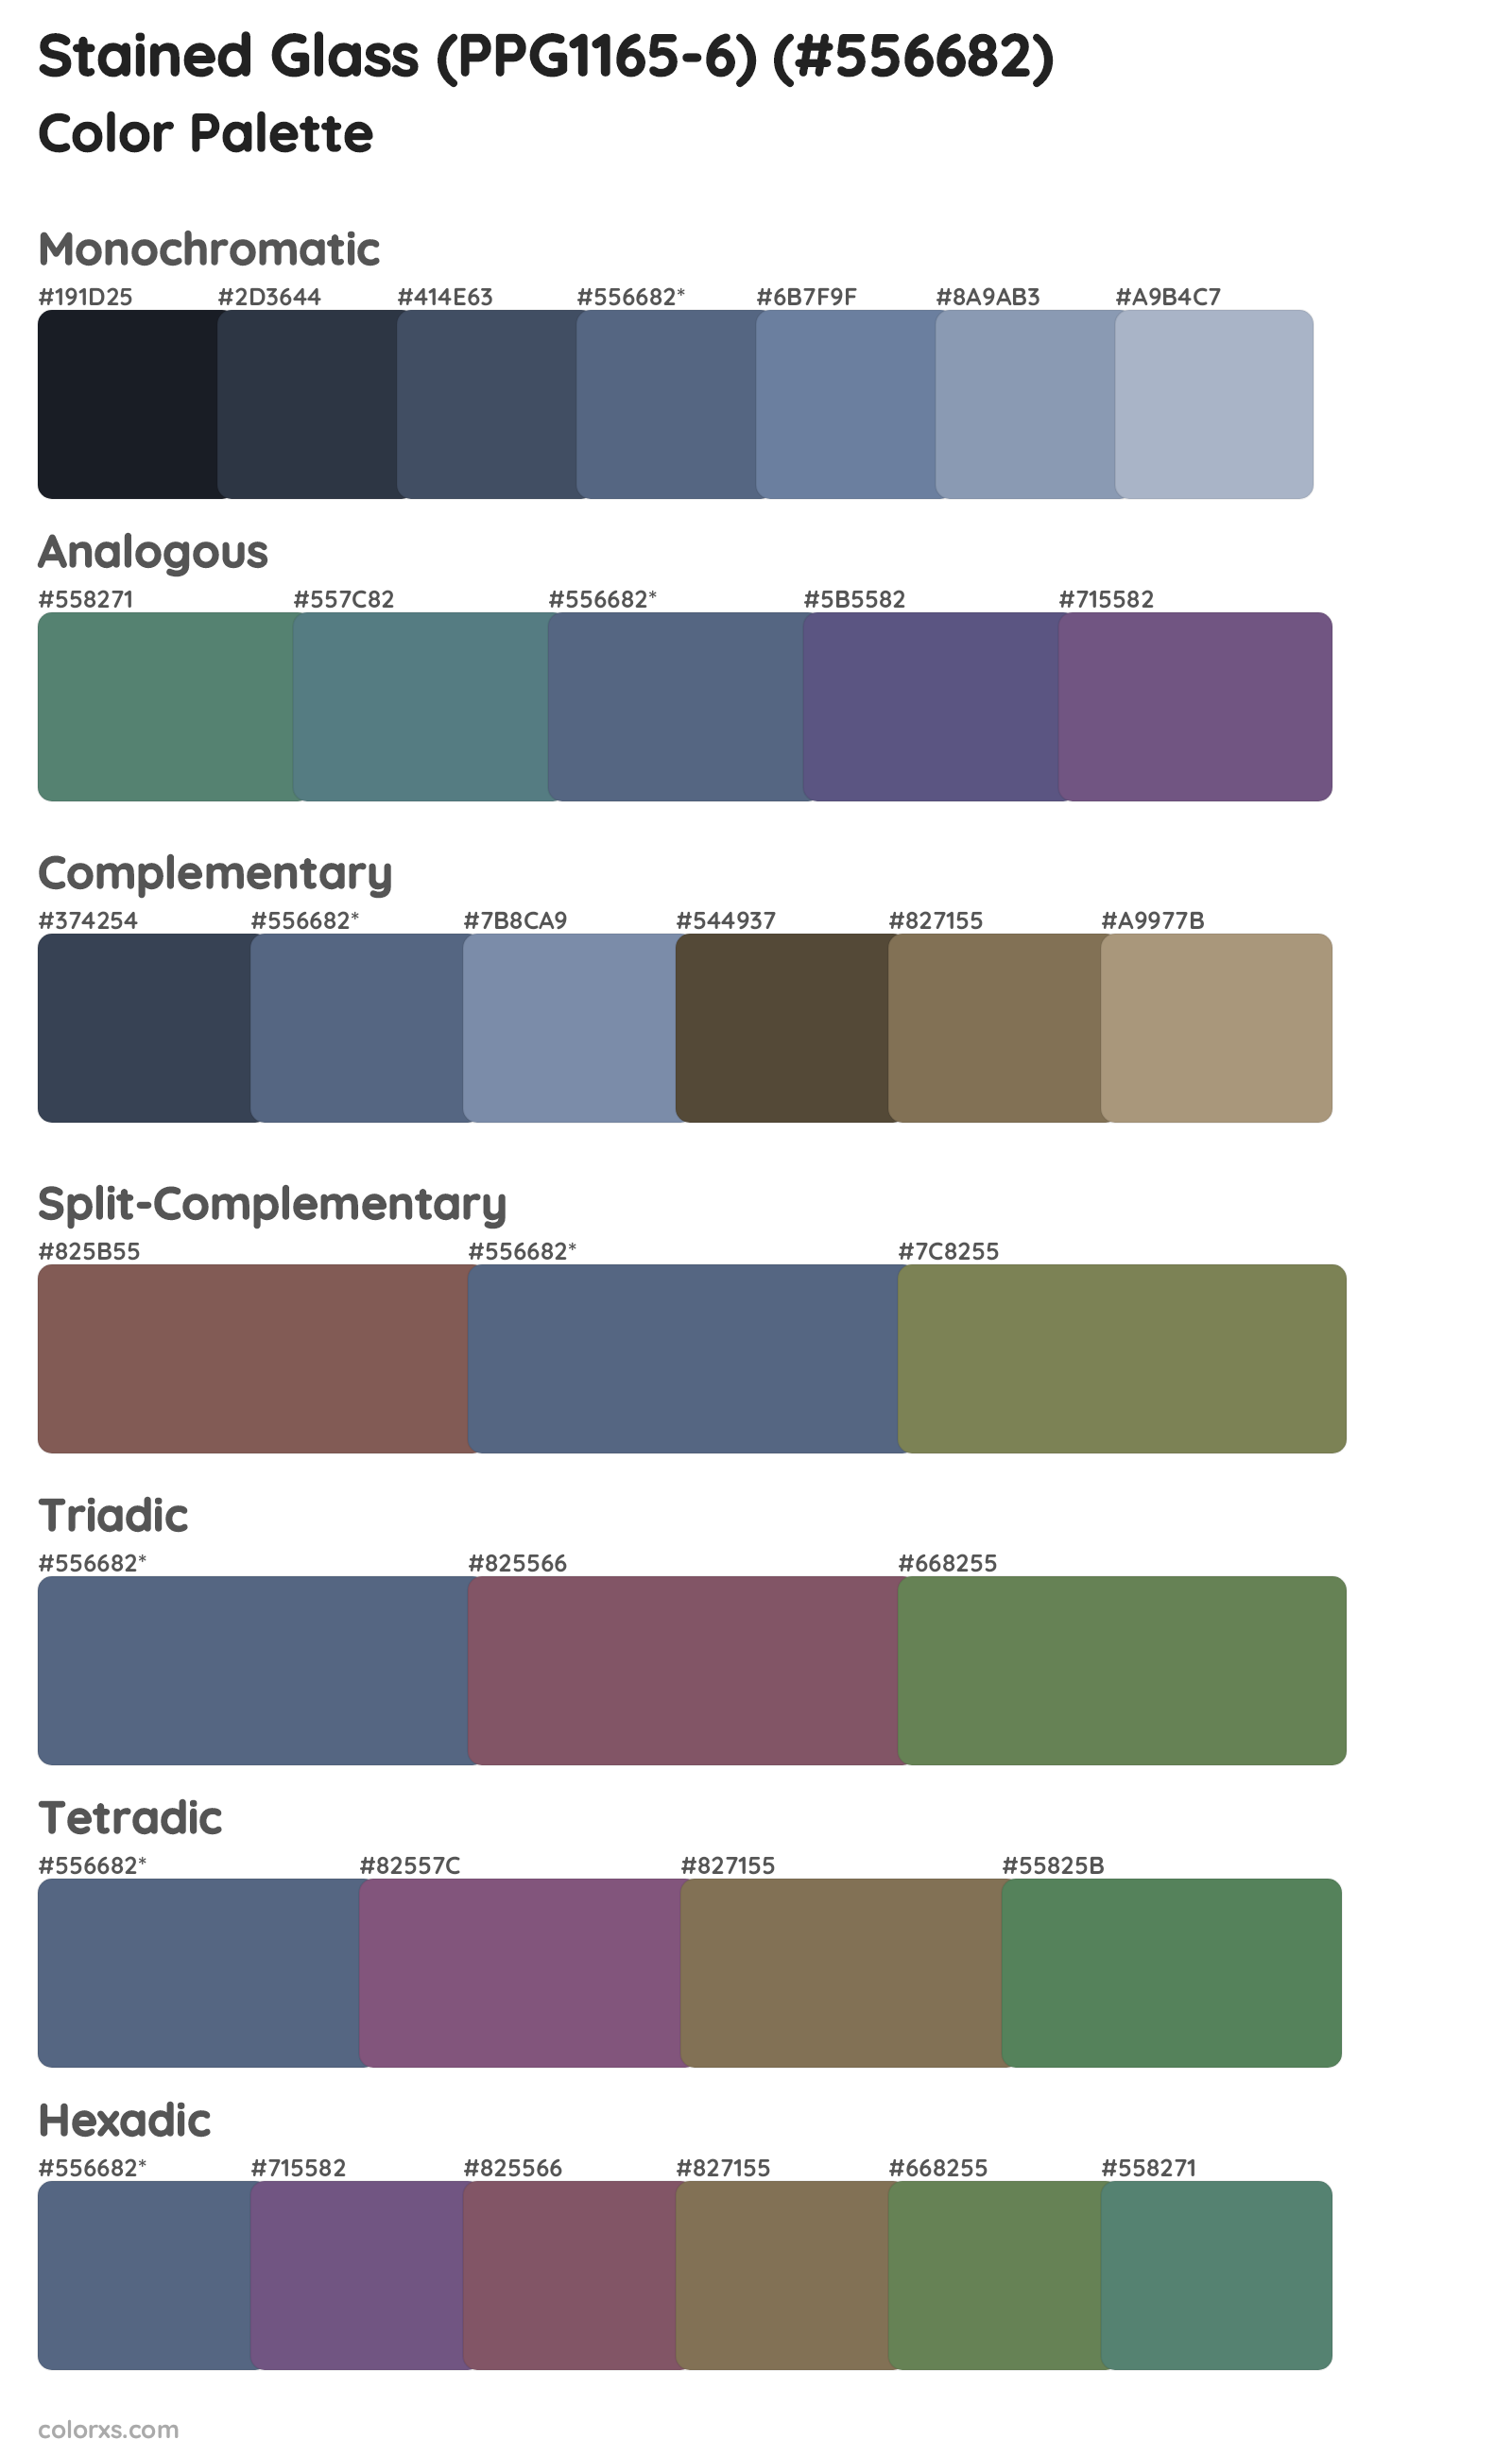 Stained Glass (PPG1165-6) Color Scheme Palettes